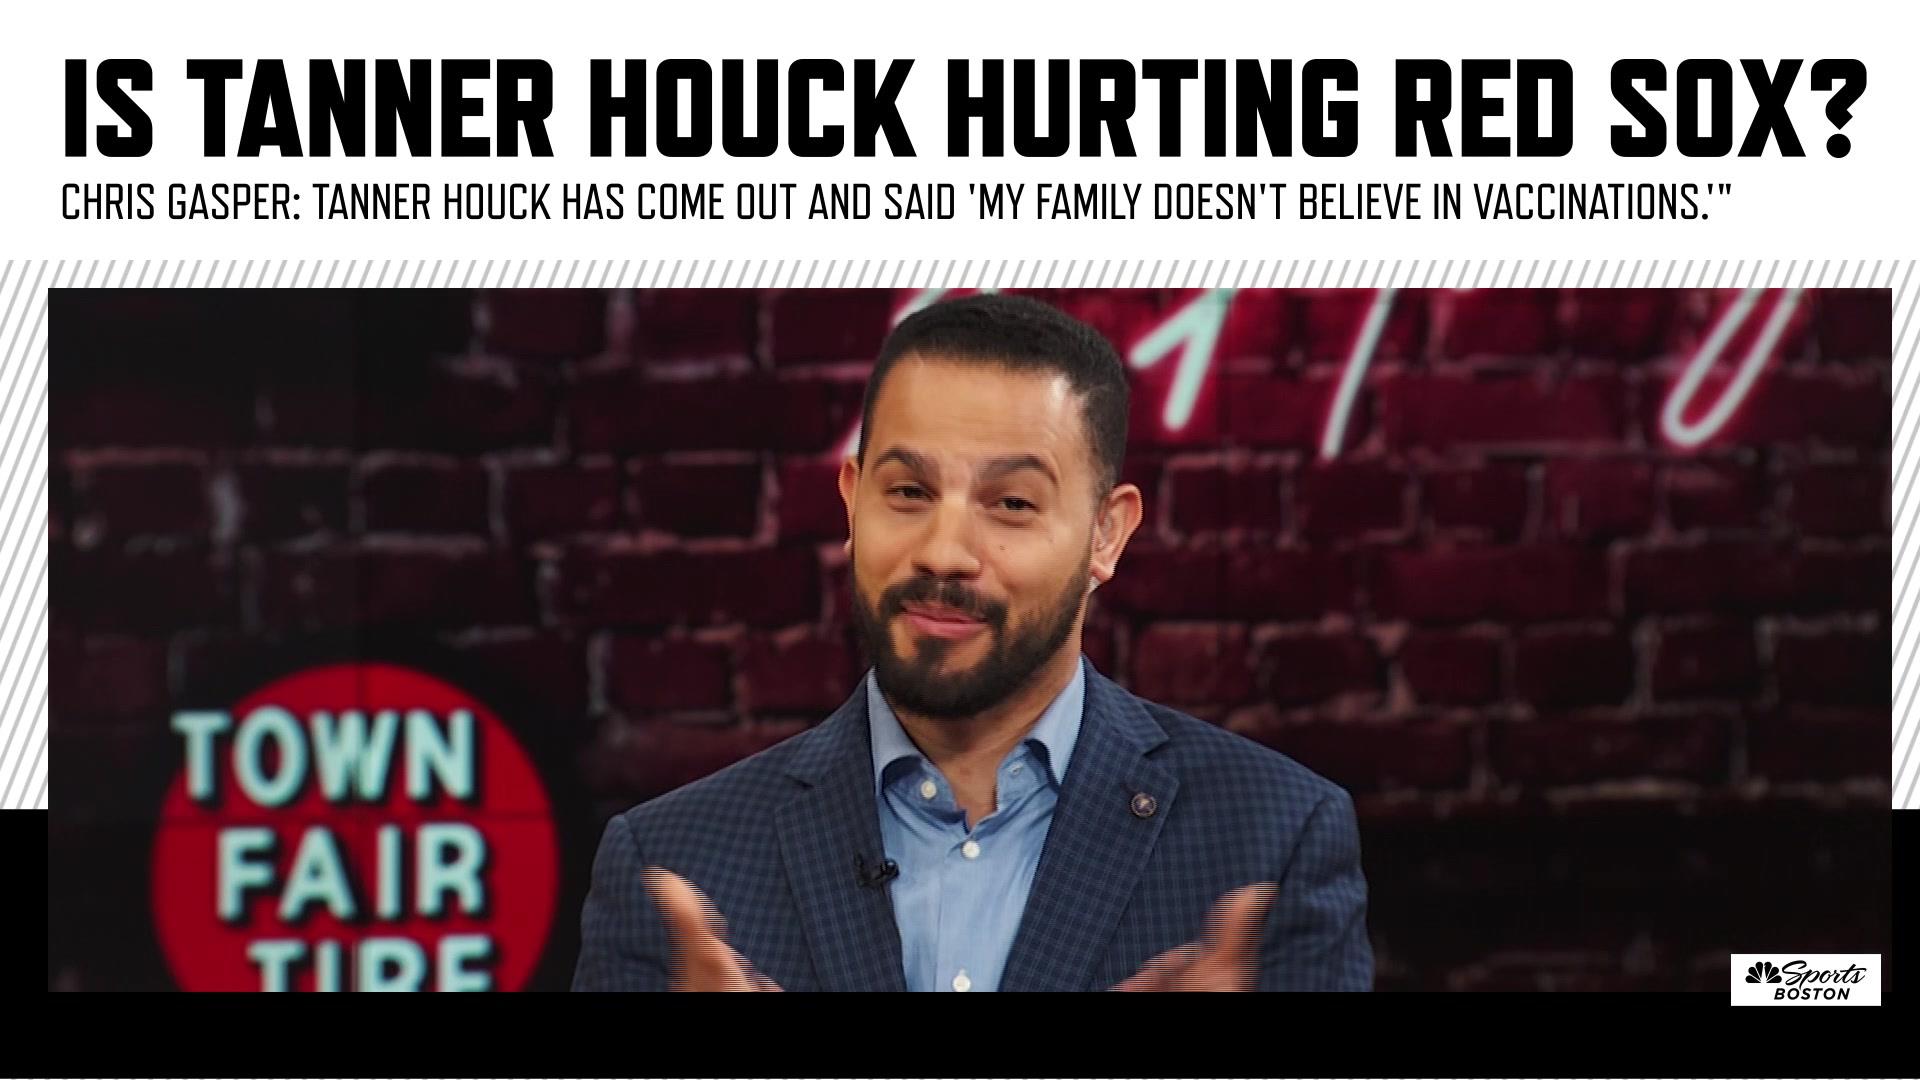 Red Sox Tanner Houck ripped after loss, absence over unvaxxed